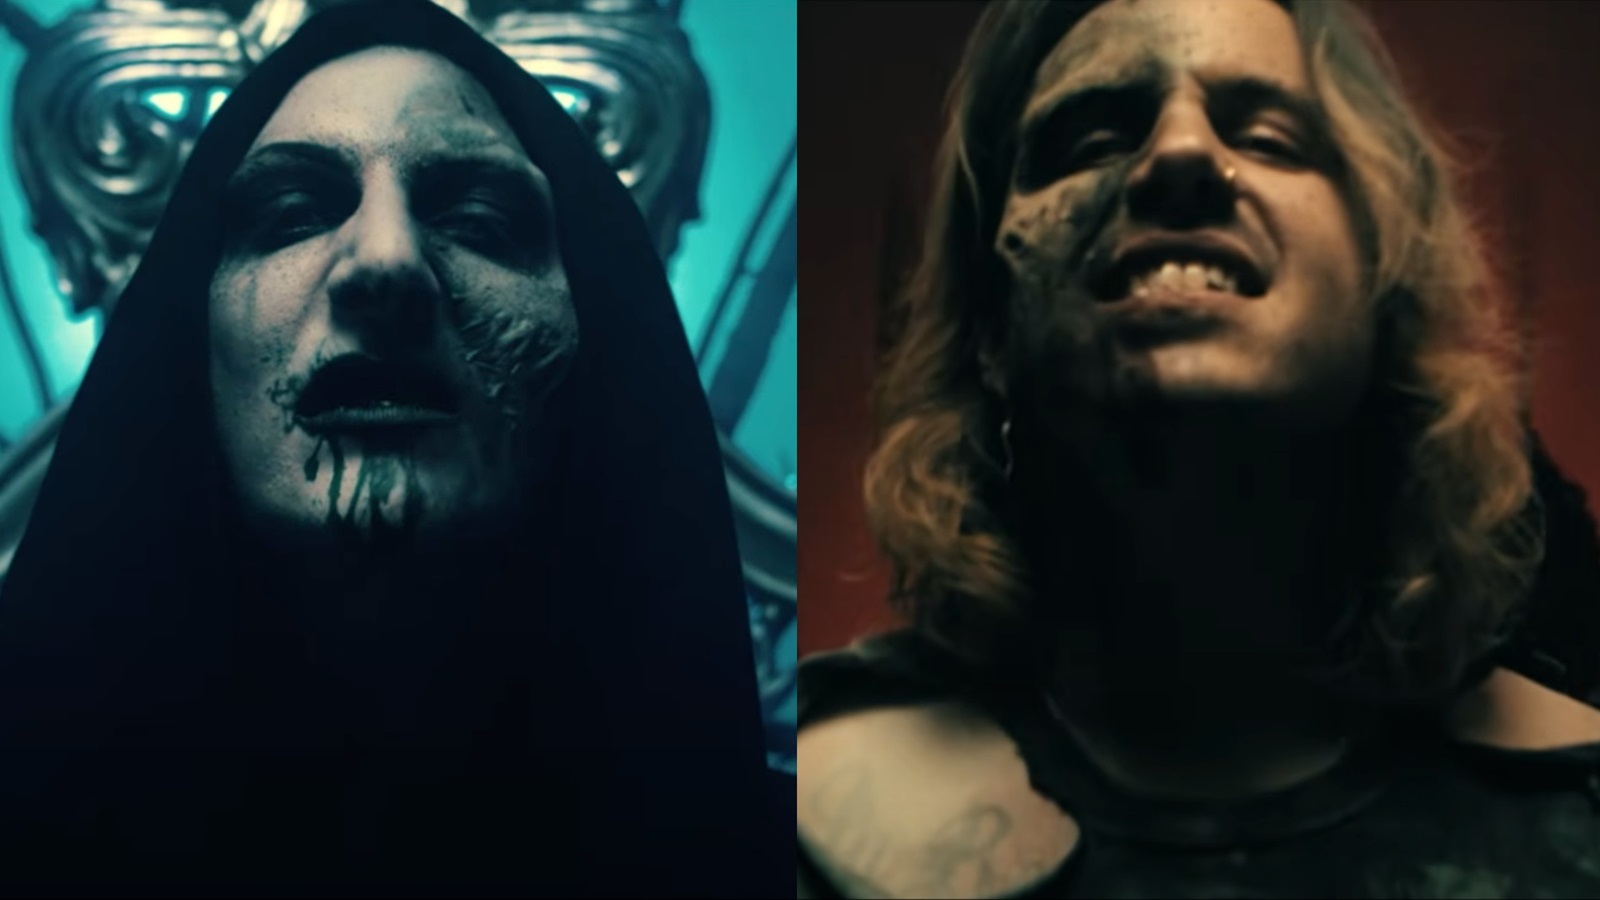 Watch CHRIS MOTIONLESS perform with OVTLIER in the video for the new battle anthem “Warriors”